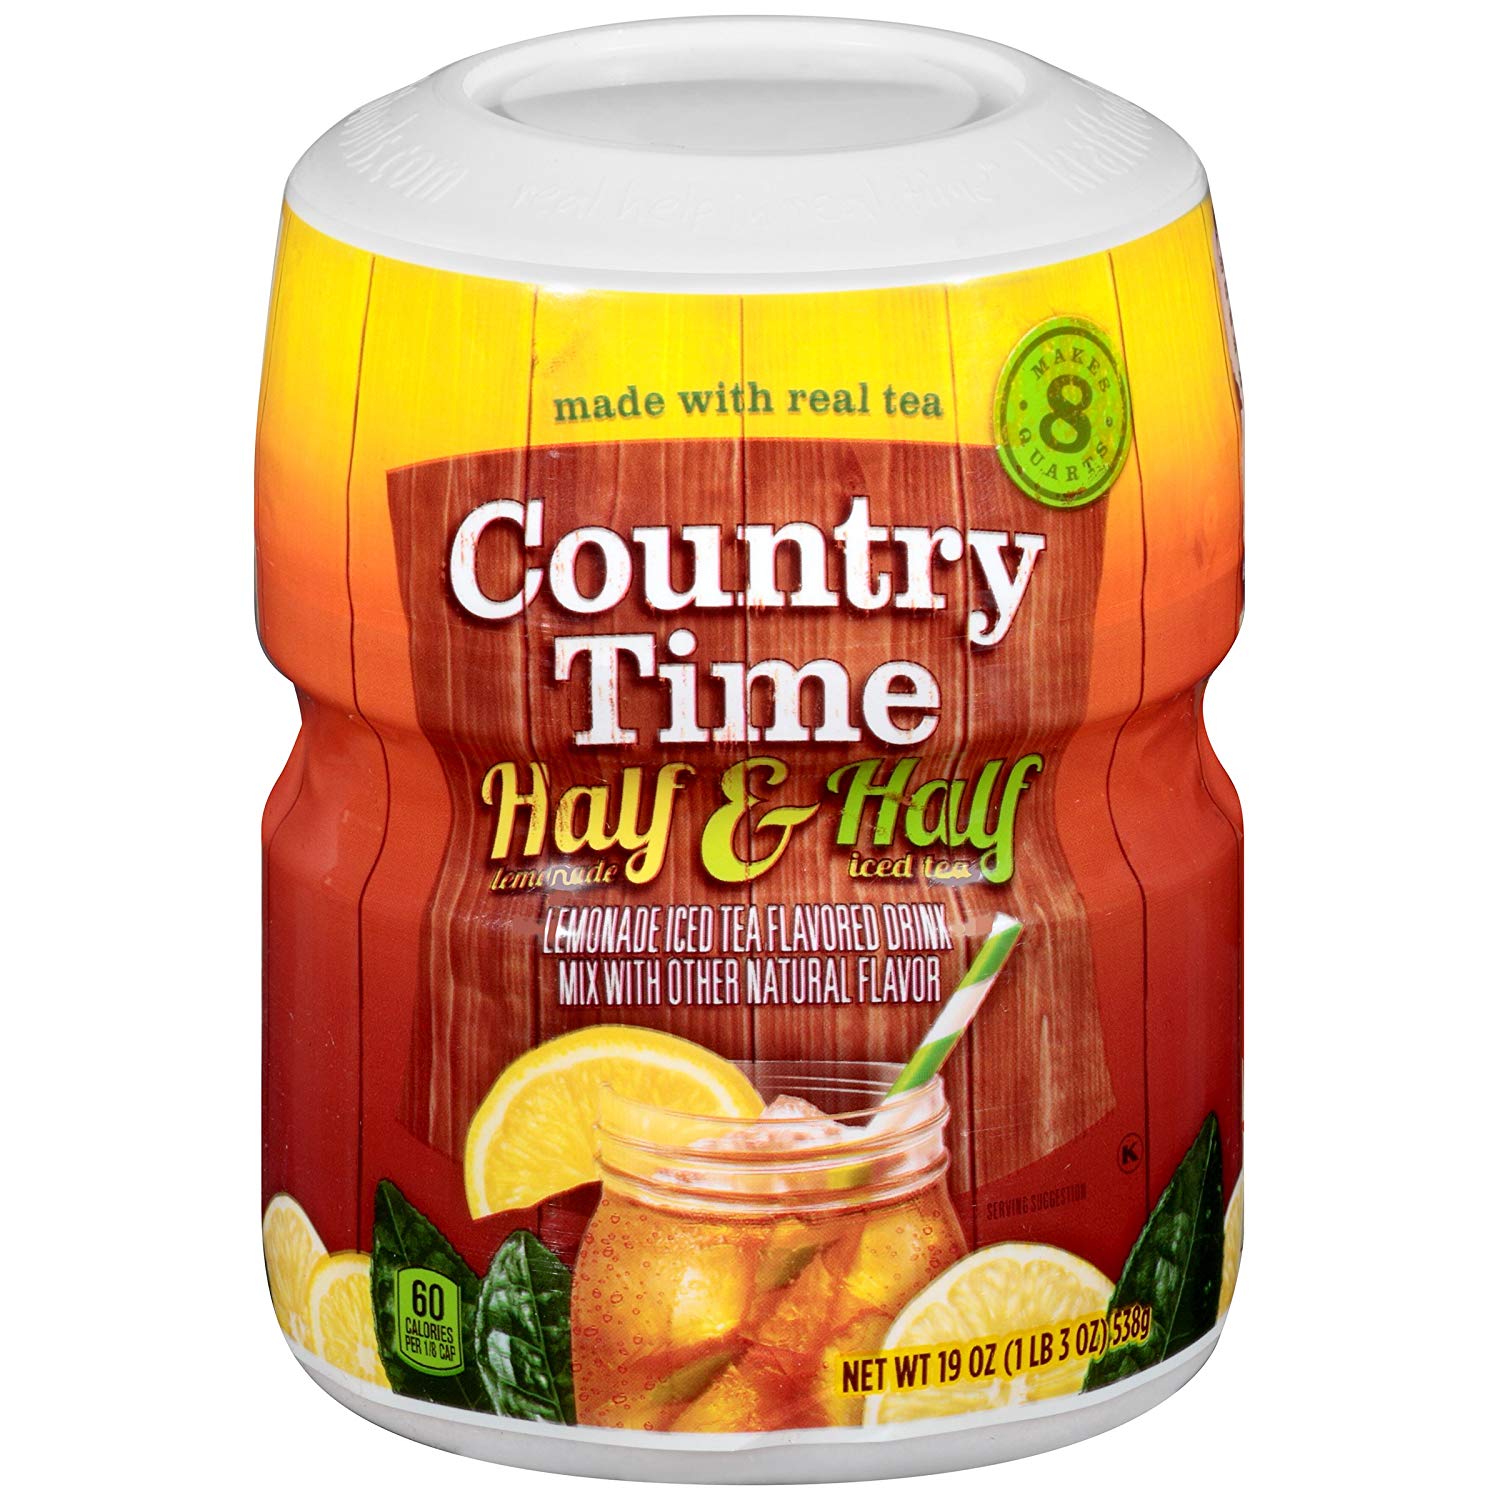 Bột Chanh Country Time Hay & Hay-538gr